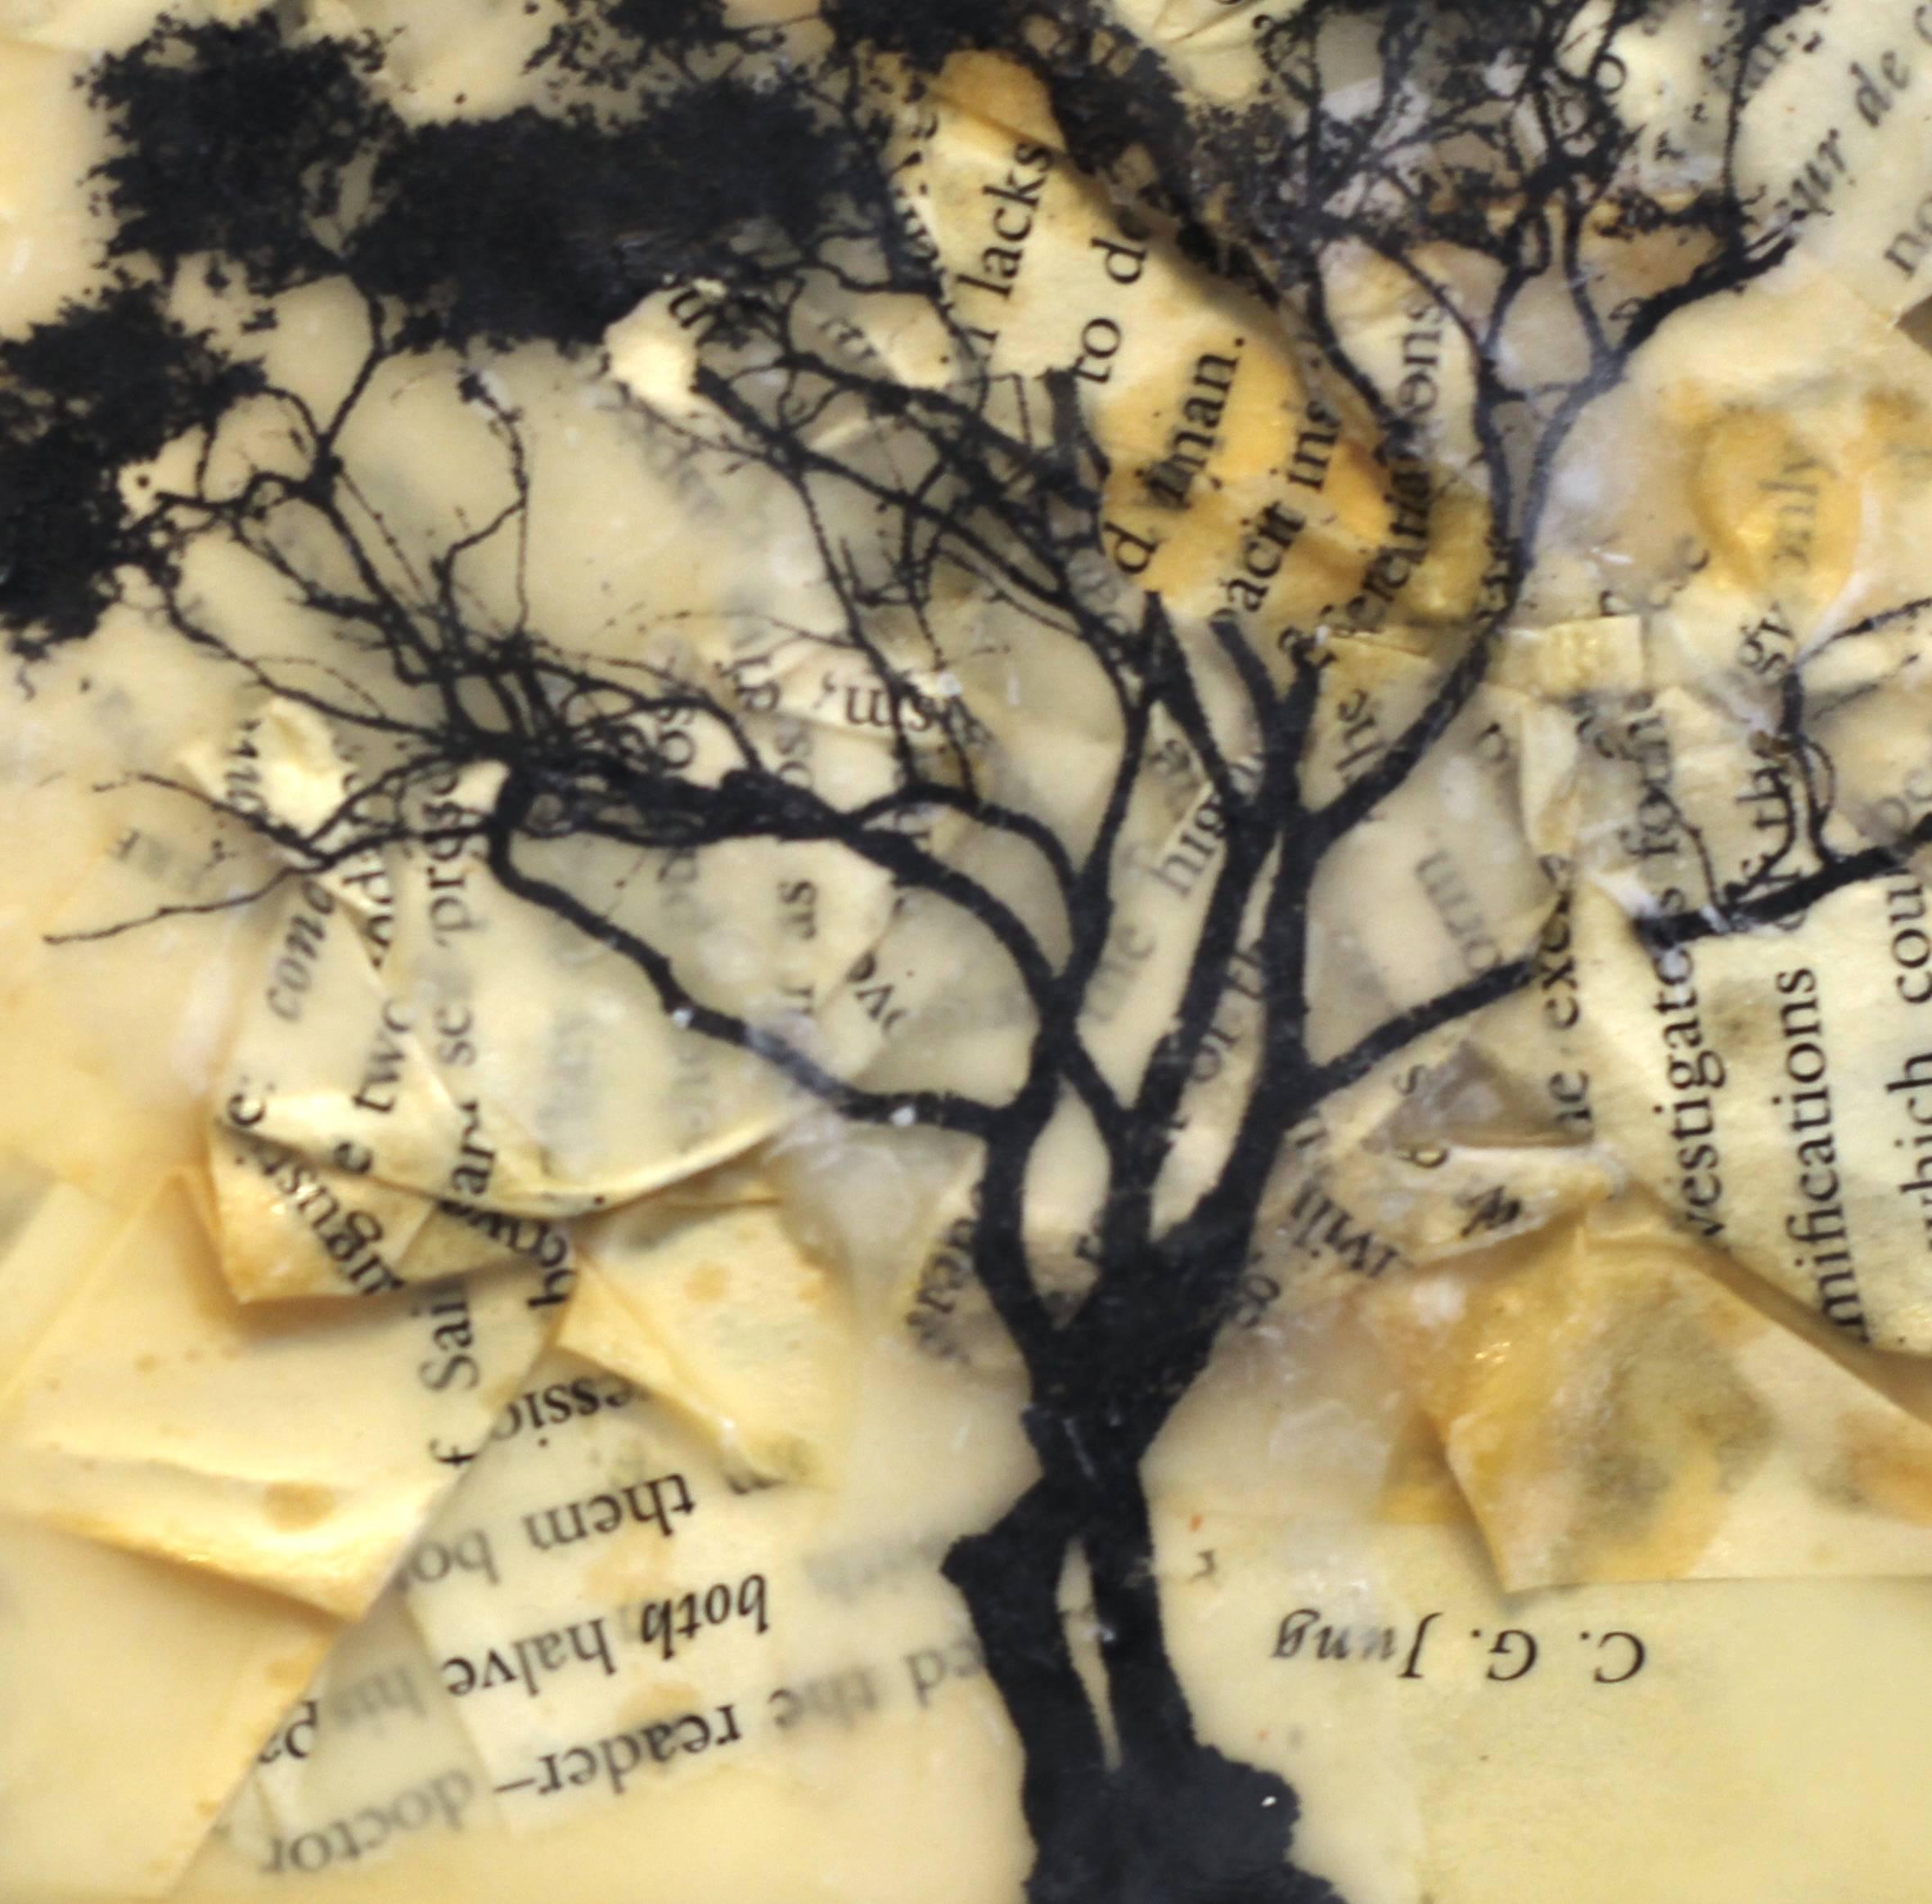 Los Angeles artist Adam Nisenson uses encaustic paint and pages from books to create subtly nuanced scenes of trees juxtaposed with text. His original, thought-provoking artworks urge the viewer to look closer and examine the peaceful, textured